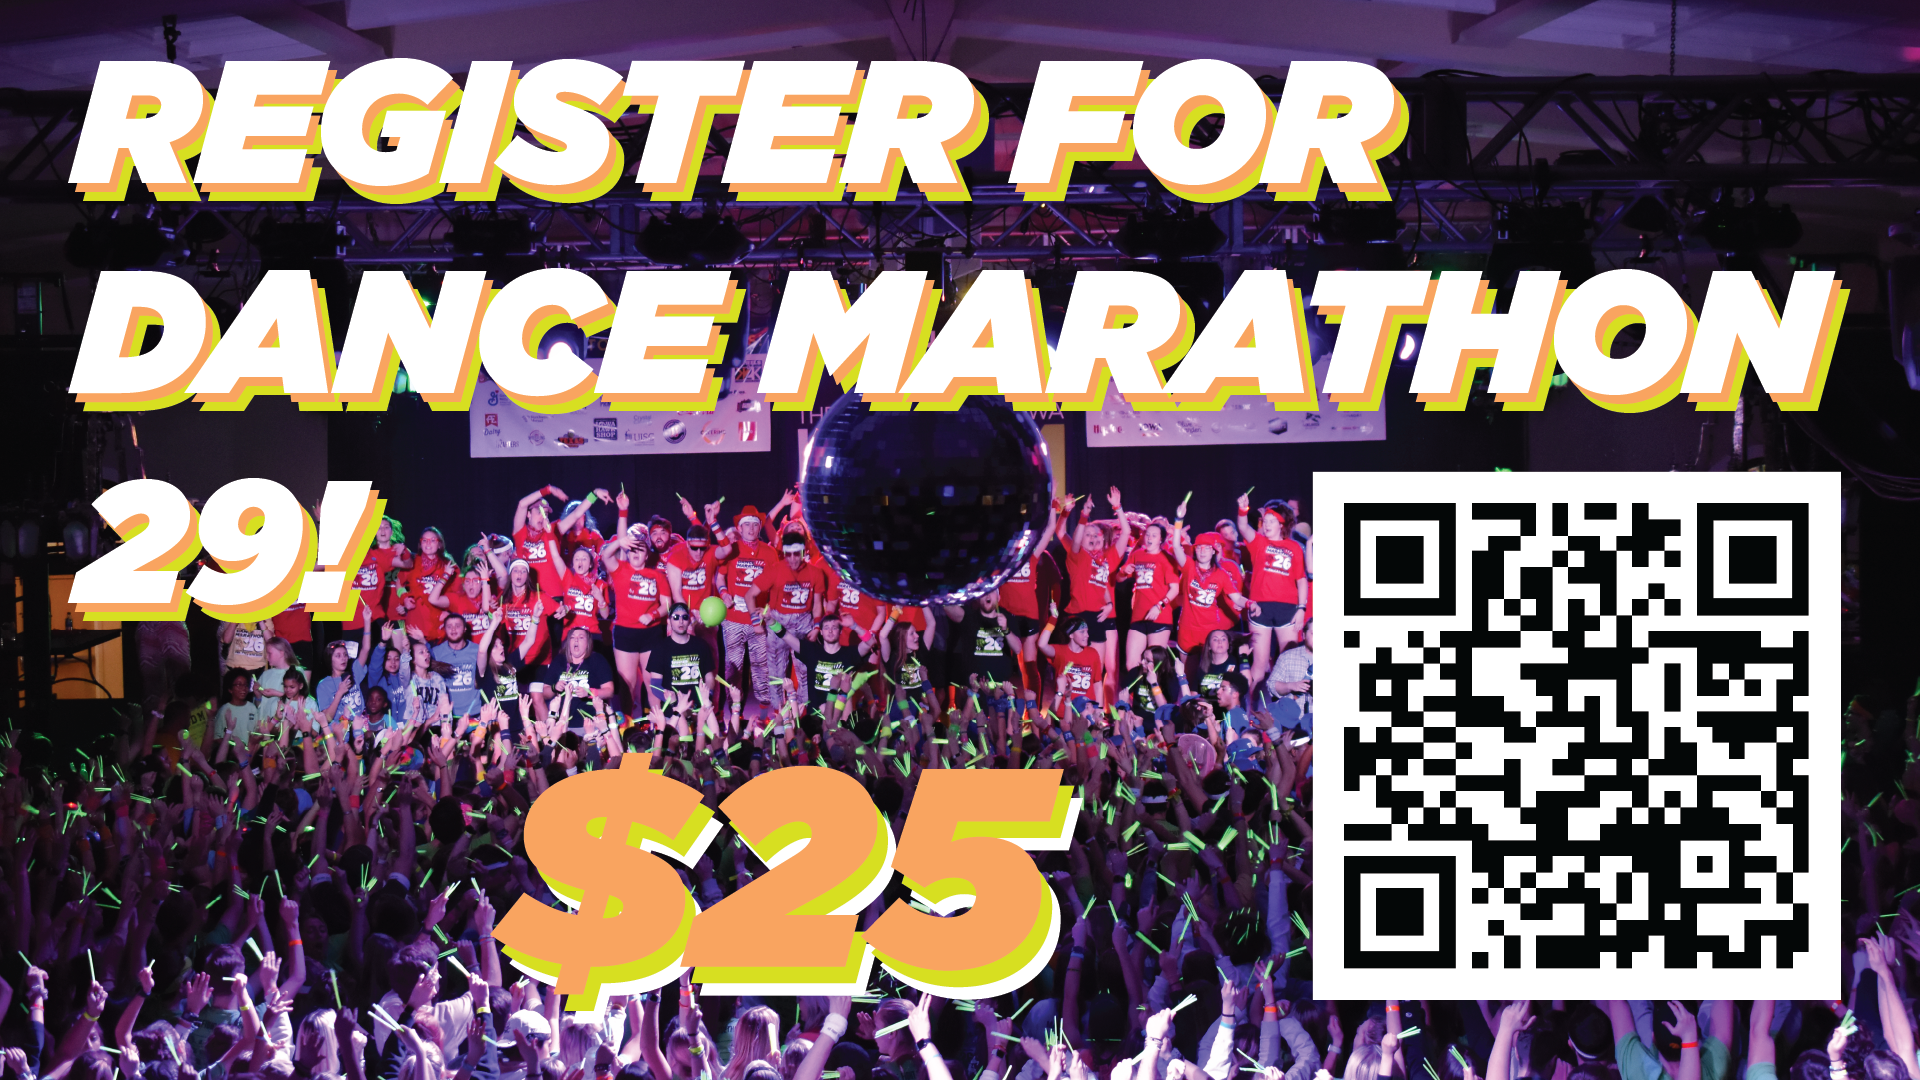 A picture from the Big event. On the image there is words about registering for Dance Marathon. A QR code is also included to help people register.